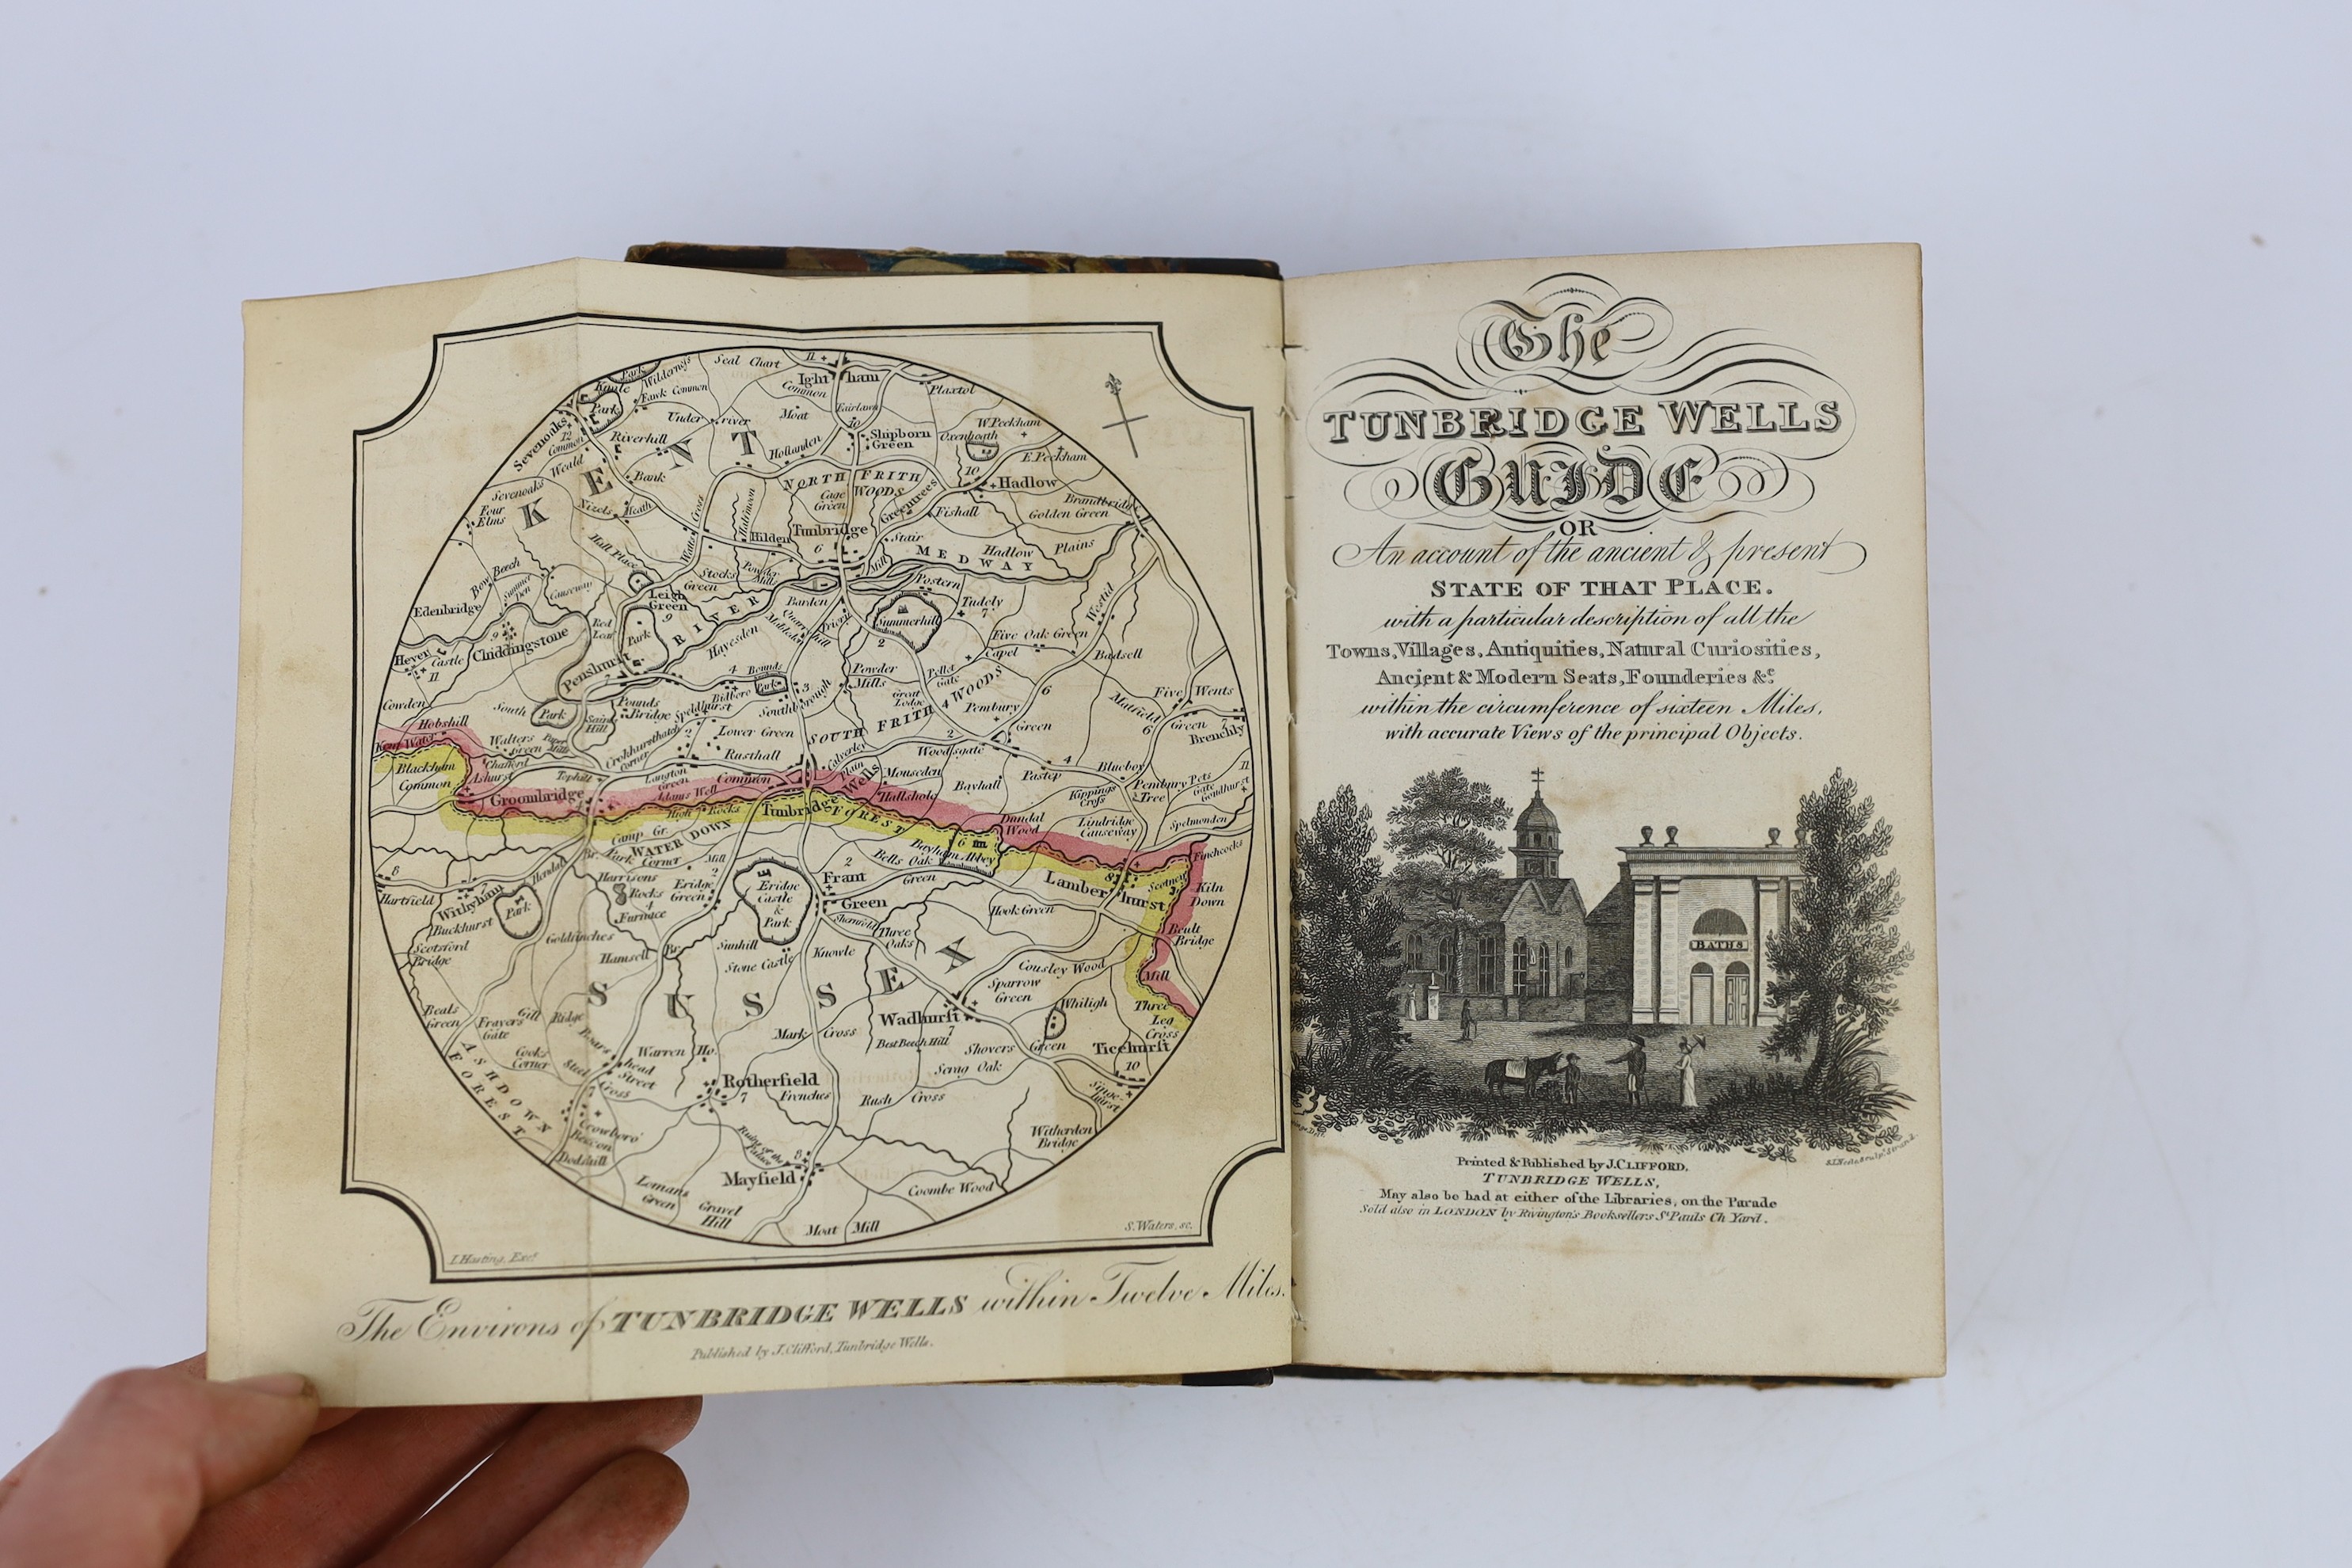 KENT, TUNBRIDGE WELLS: The Tunbridge Wells Guide... pictorial engraved title, engraved dedication, folded map, 6 plates (4 d-page or folded), engraved text illus.; original cloth with printed label, 12mo. Tunbridge Wells